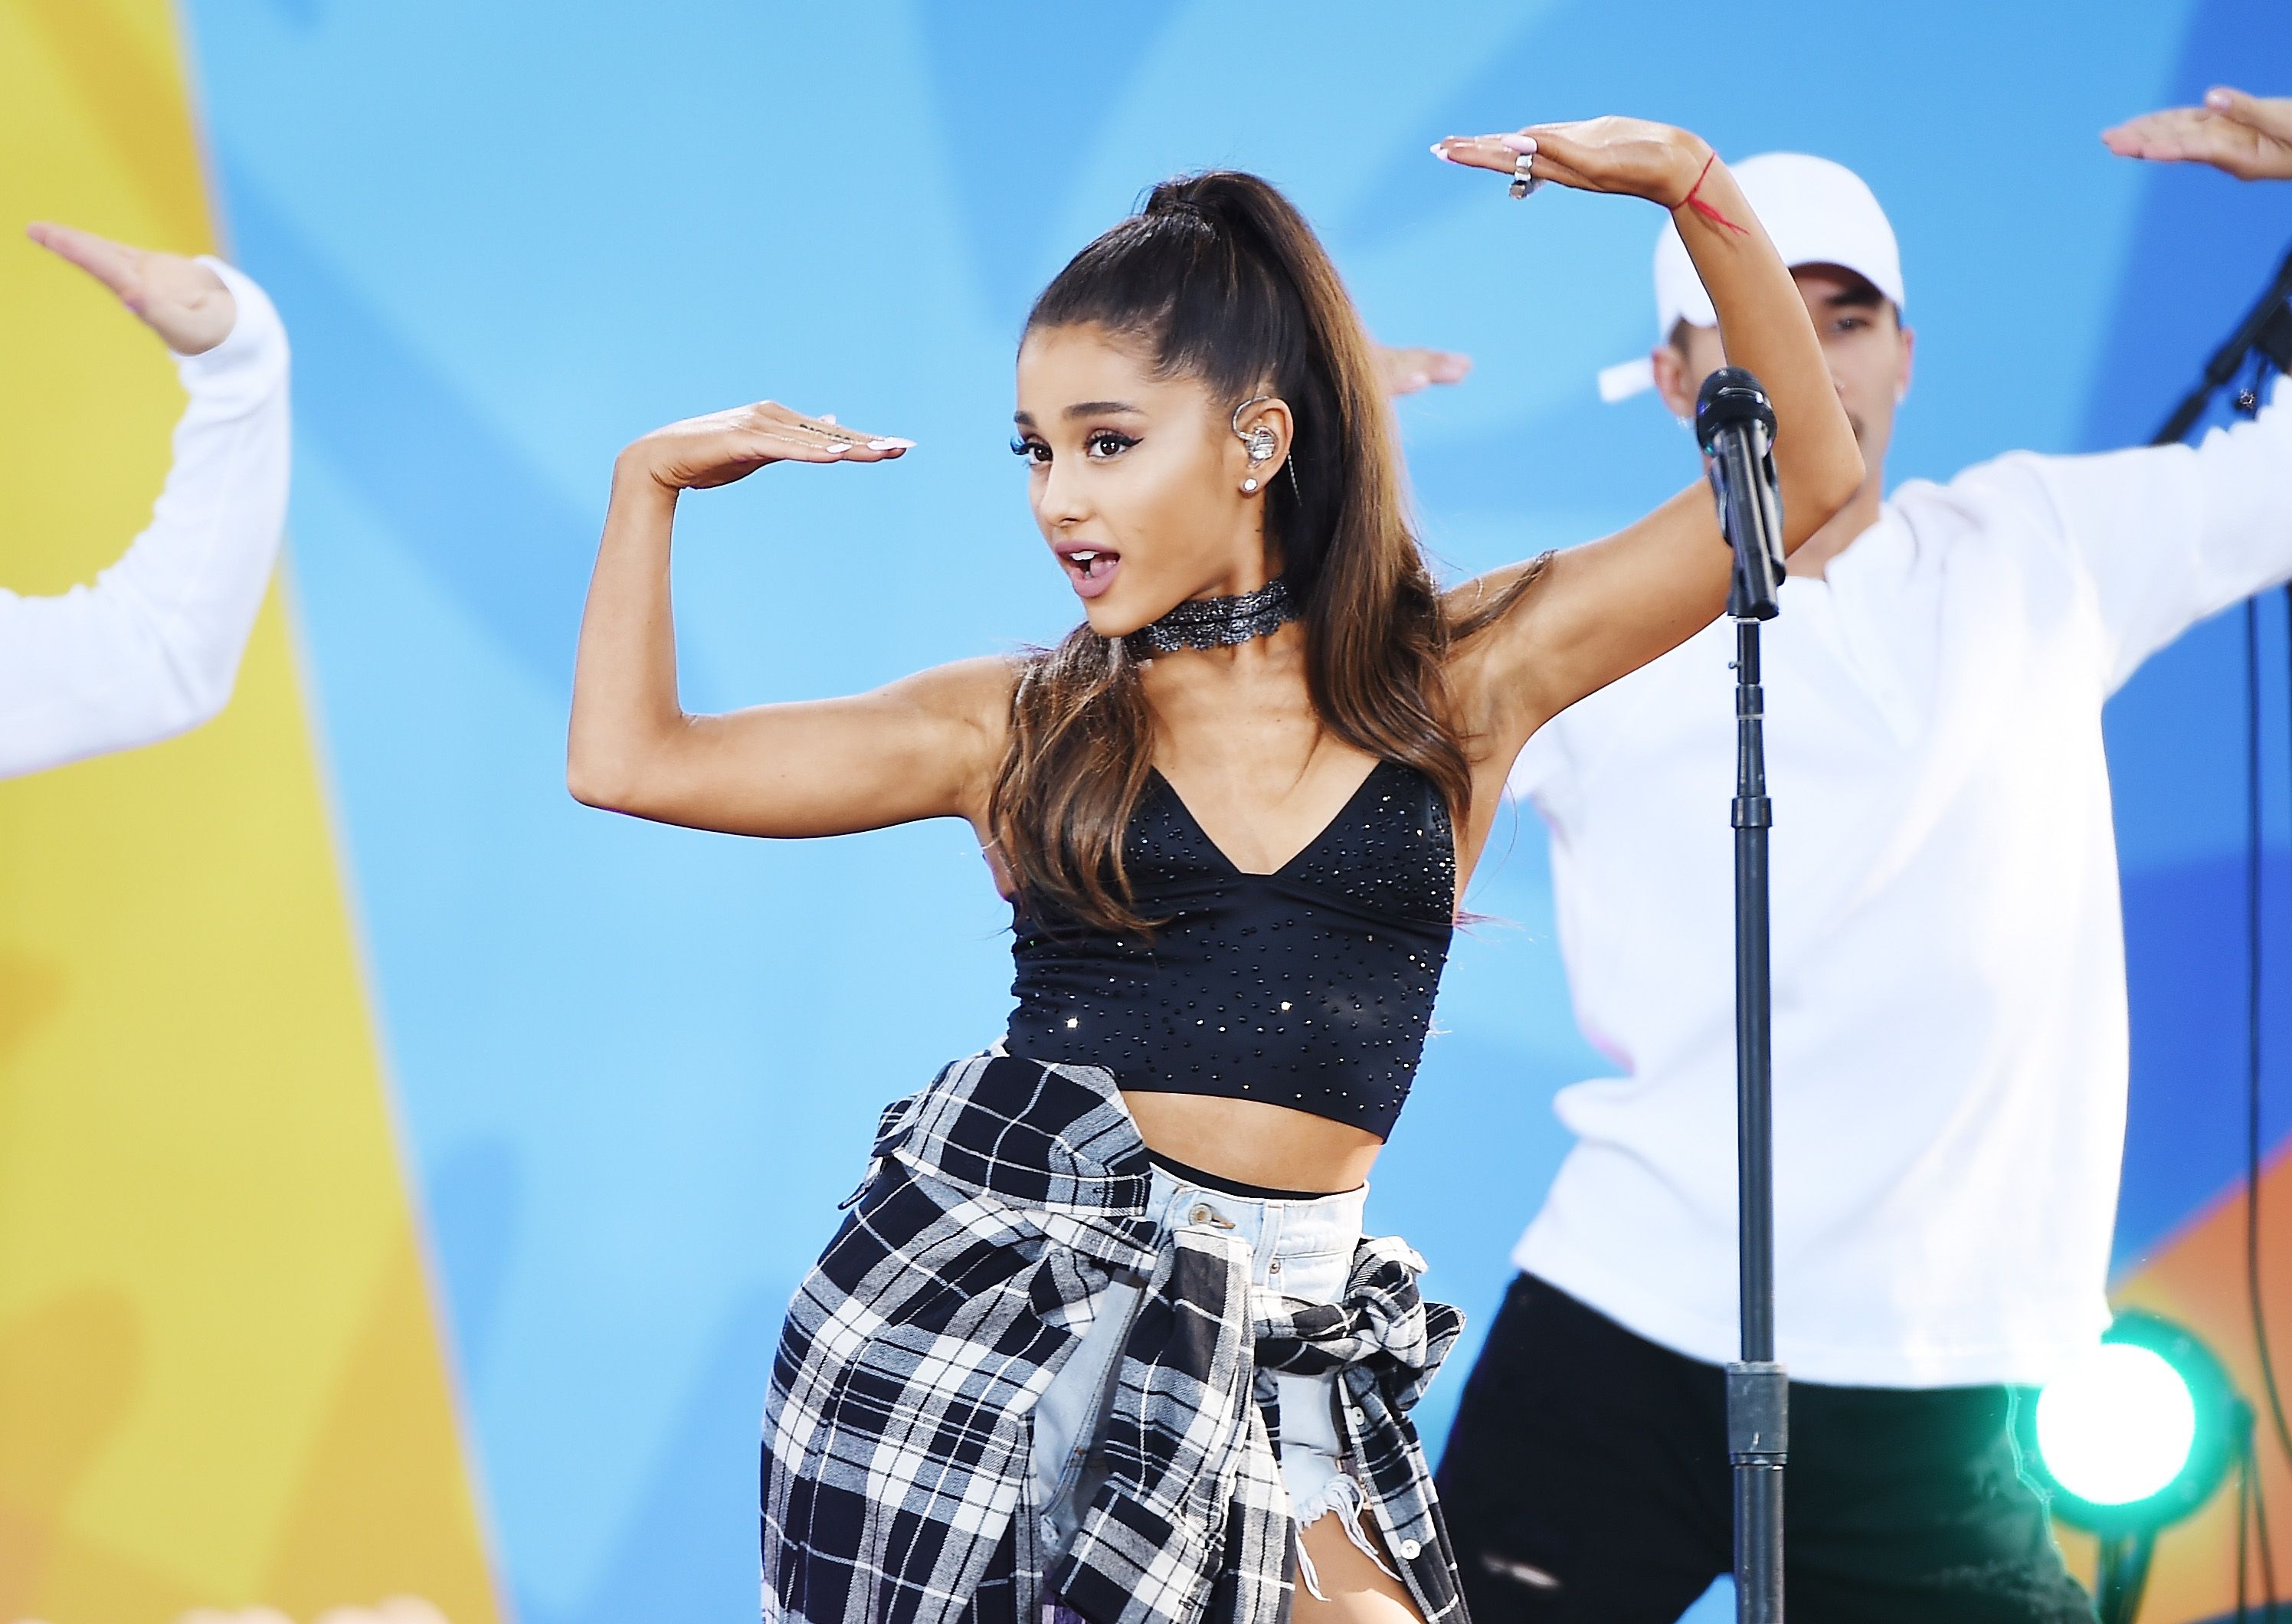 Ariana Grande reveals she will be in a Final Fantasy mobile game